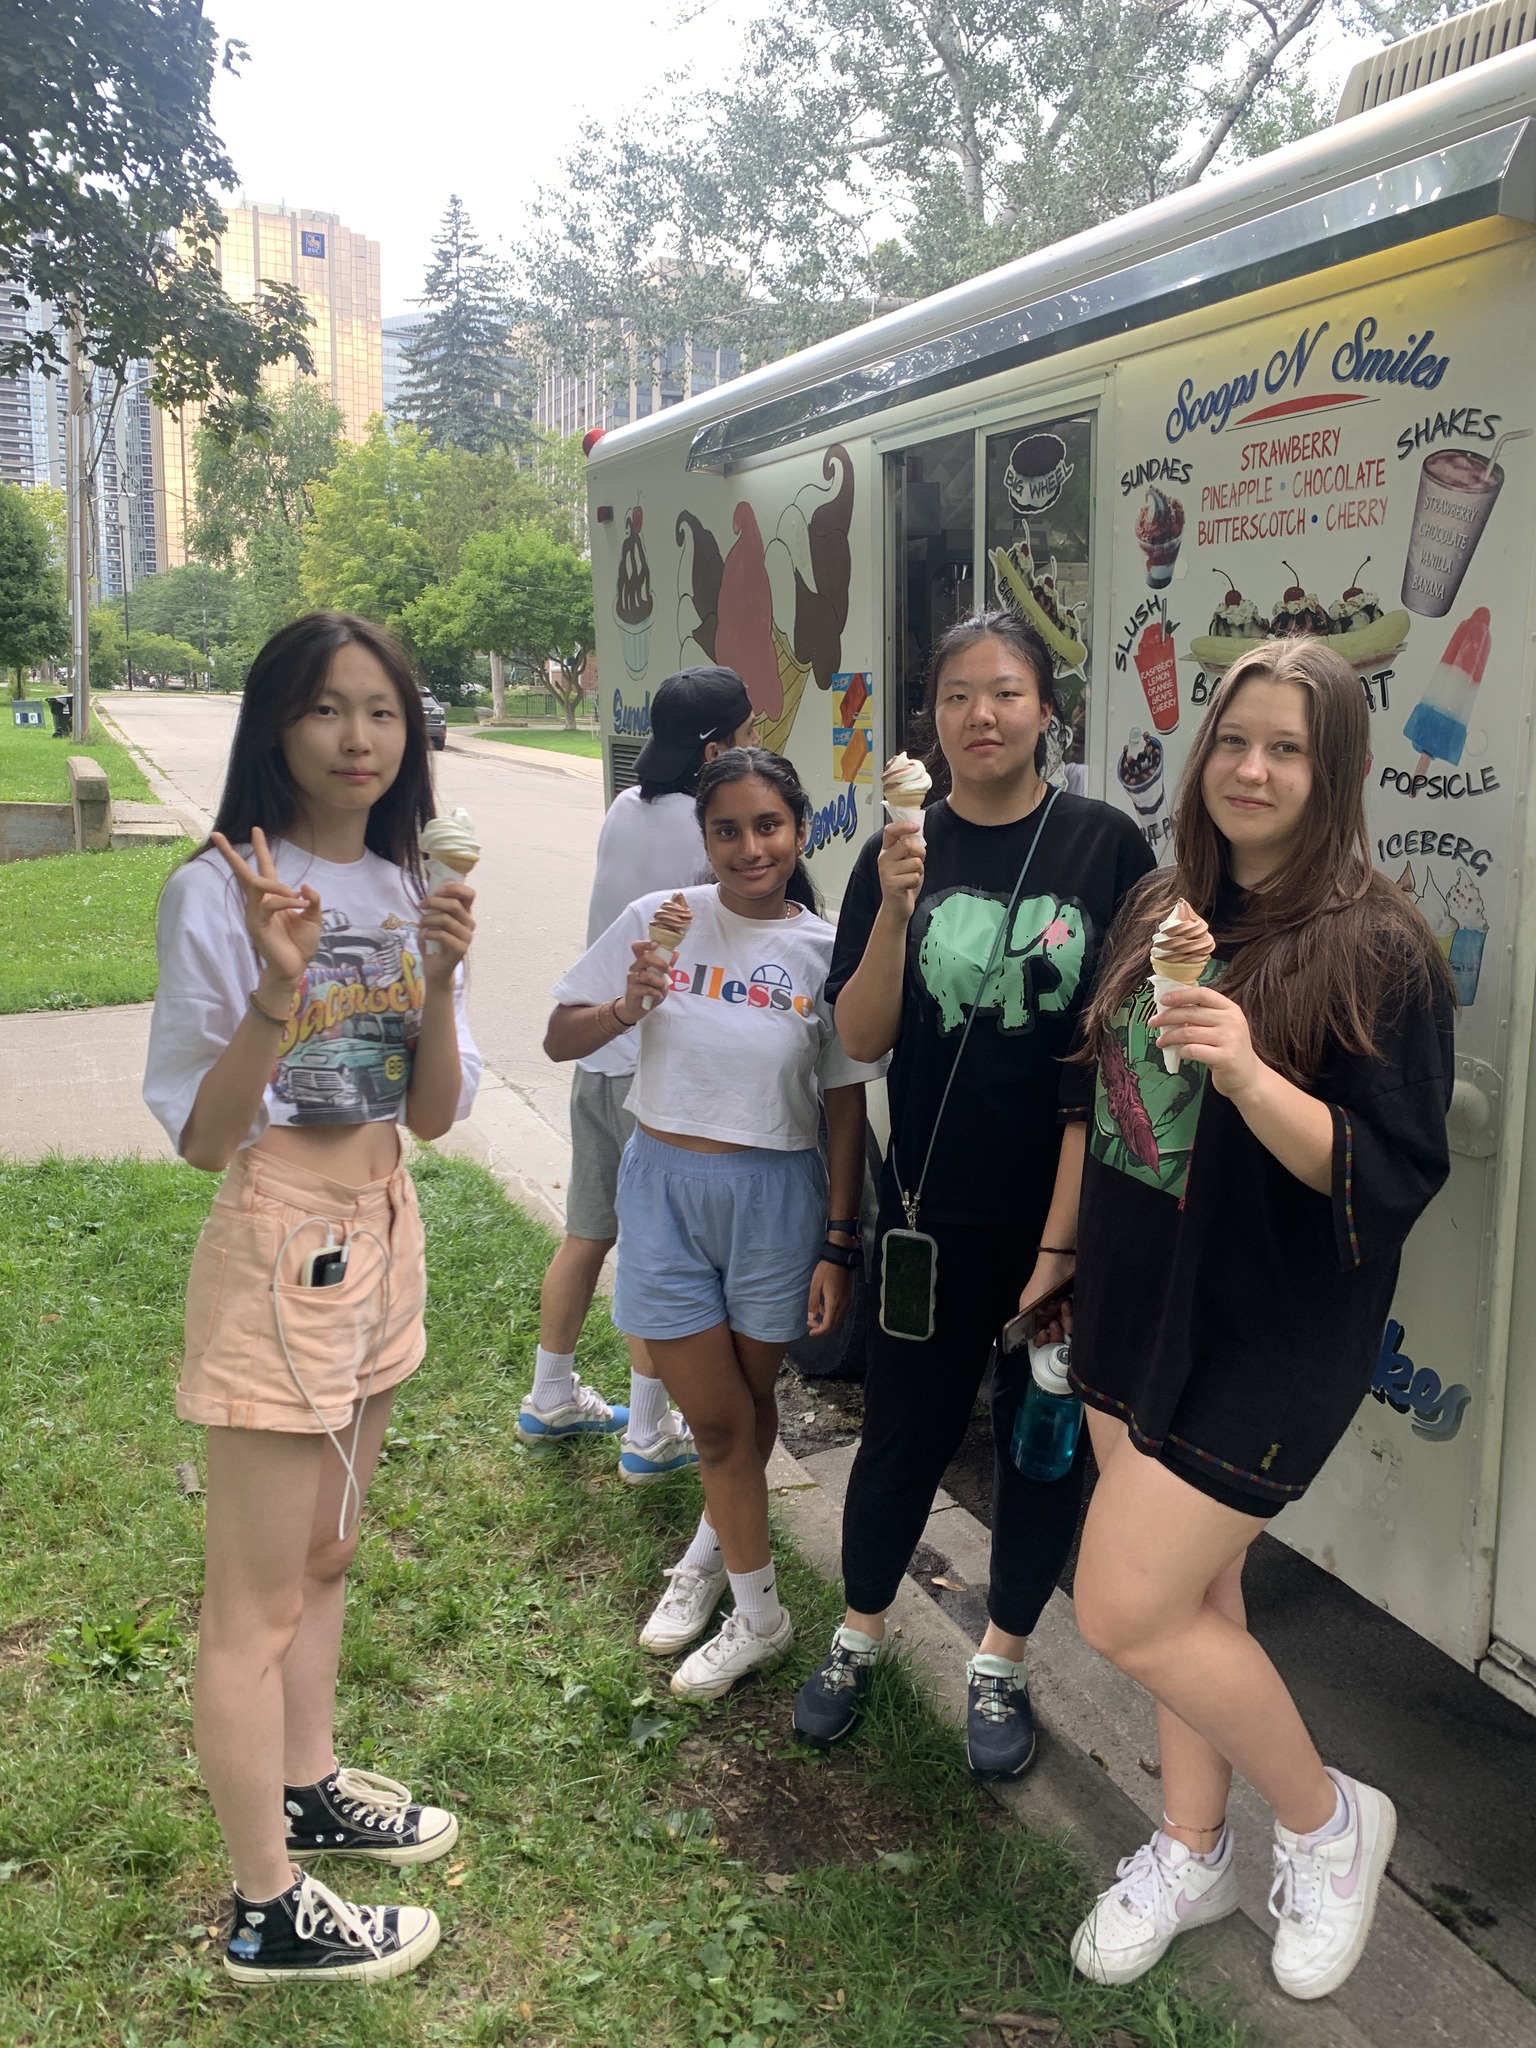 Students standing in front of ice cream truck holding ice cream Open Gallery